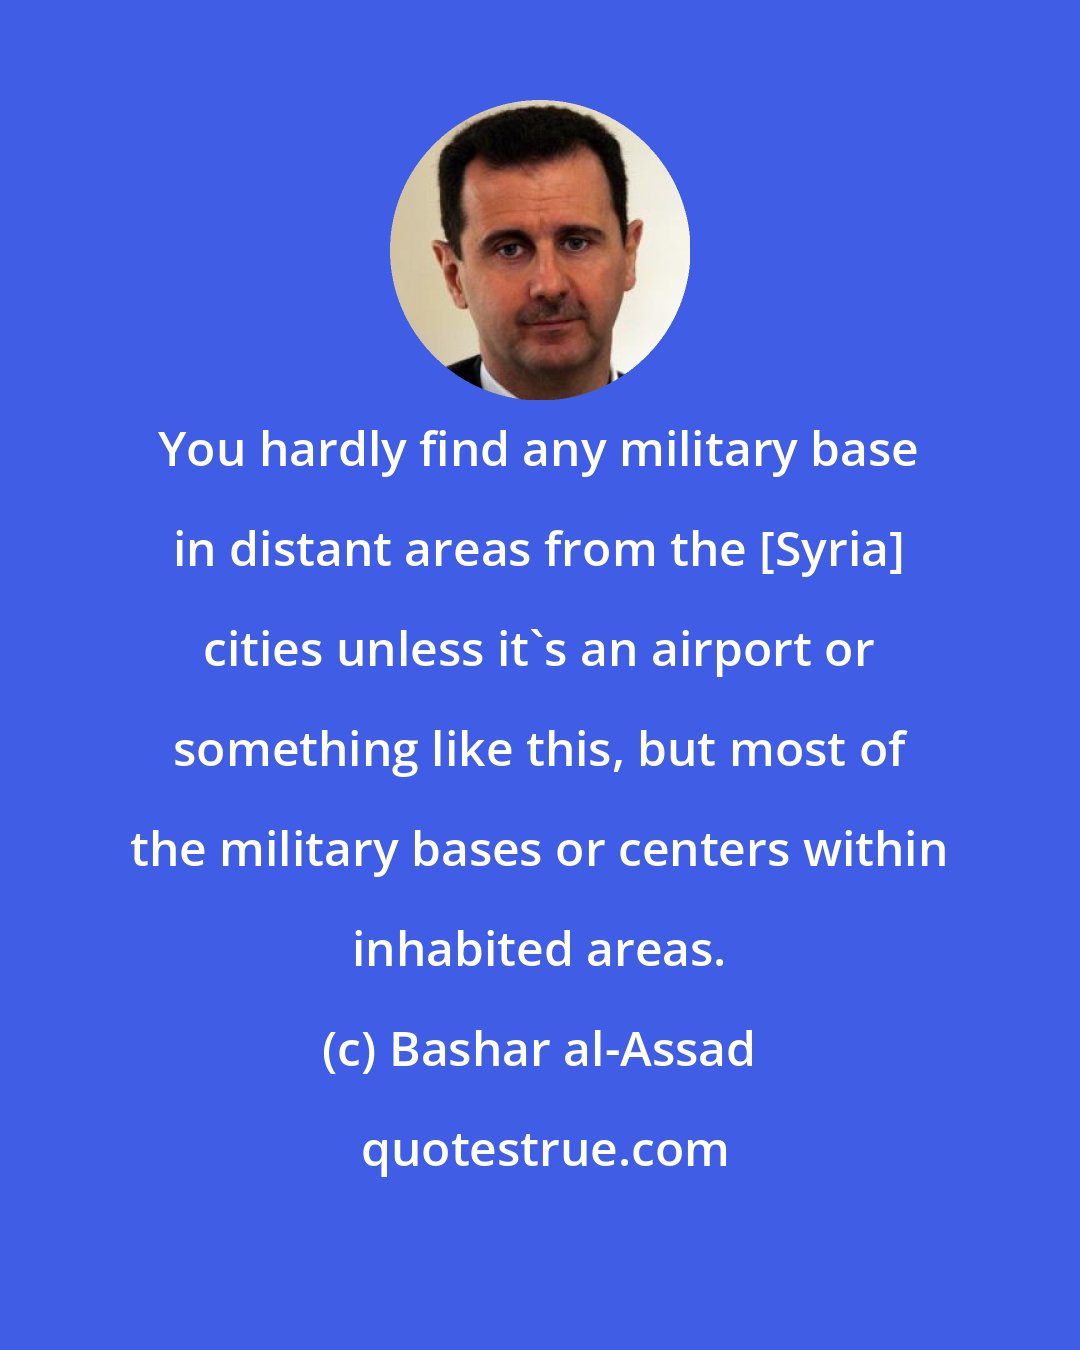 Bashar al-Assad: You hardly find any military base in distant areas from the [Syria] cities unless it's an airport or something like this, but most of the military bases or centers within inhabited areas.